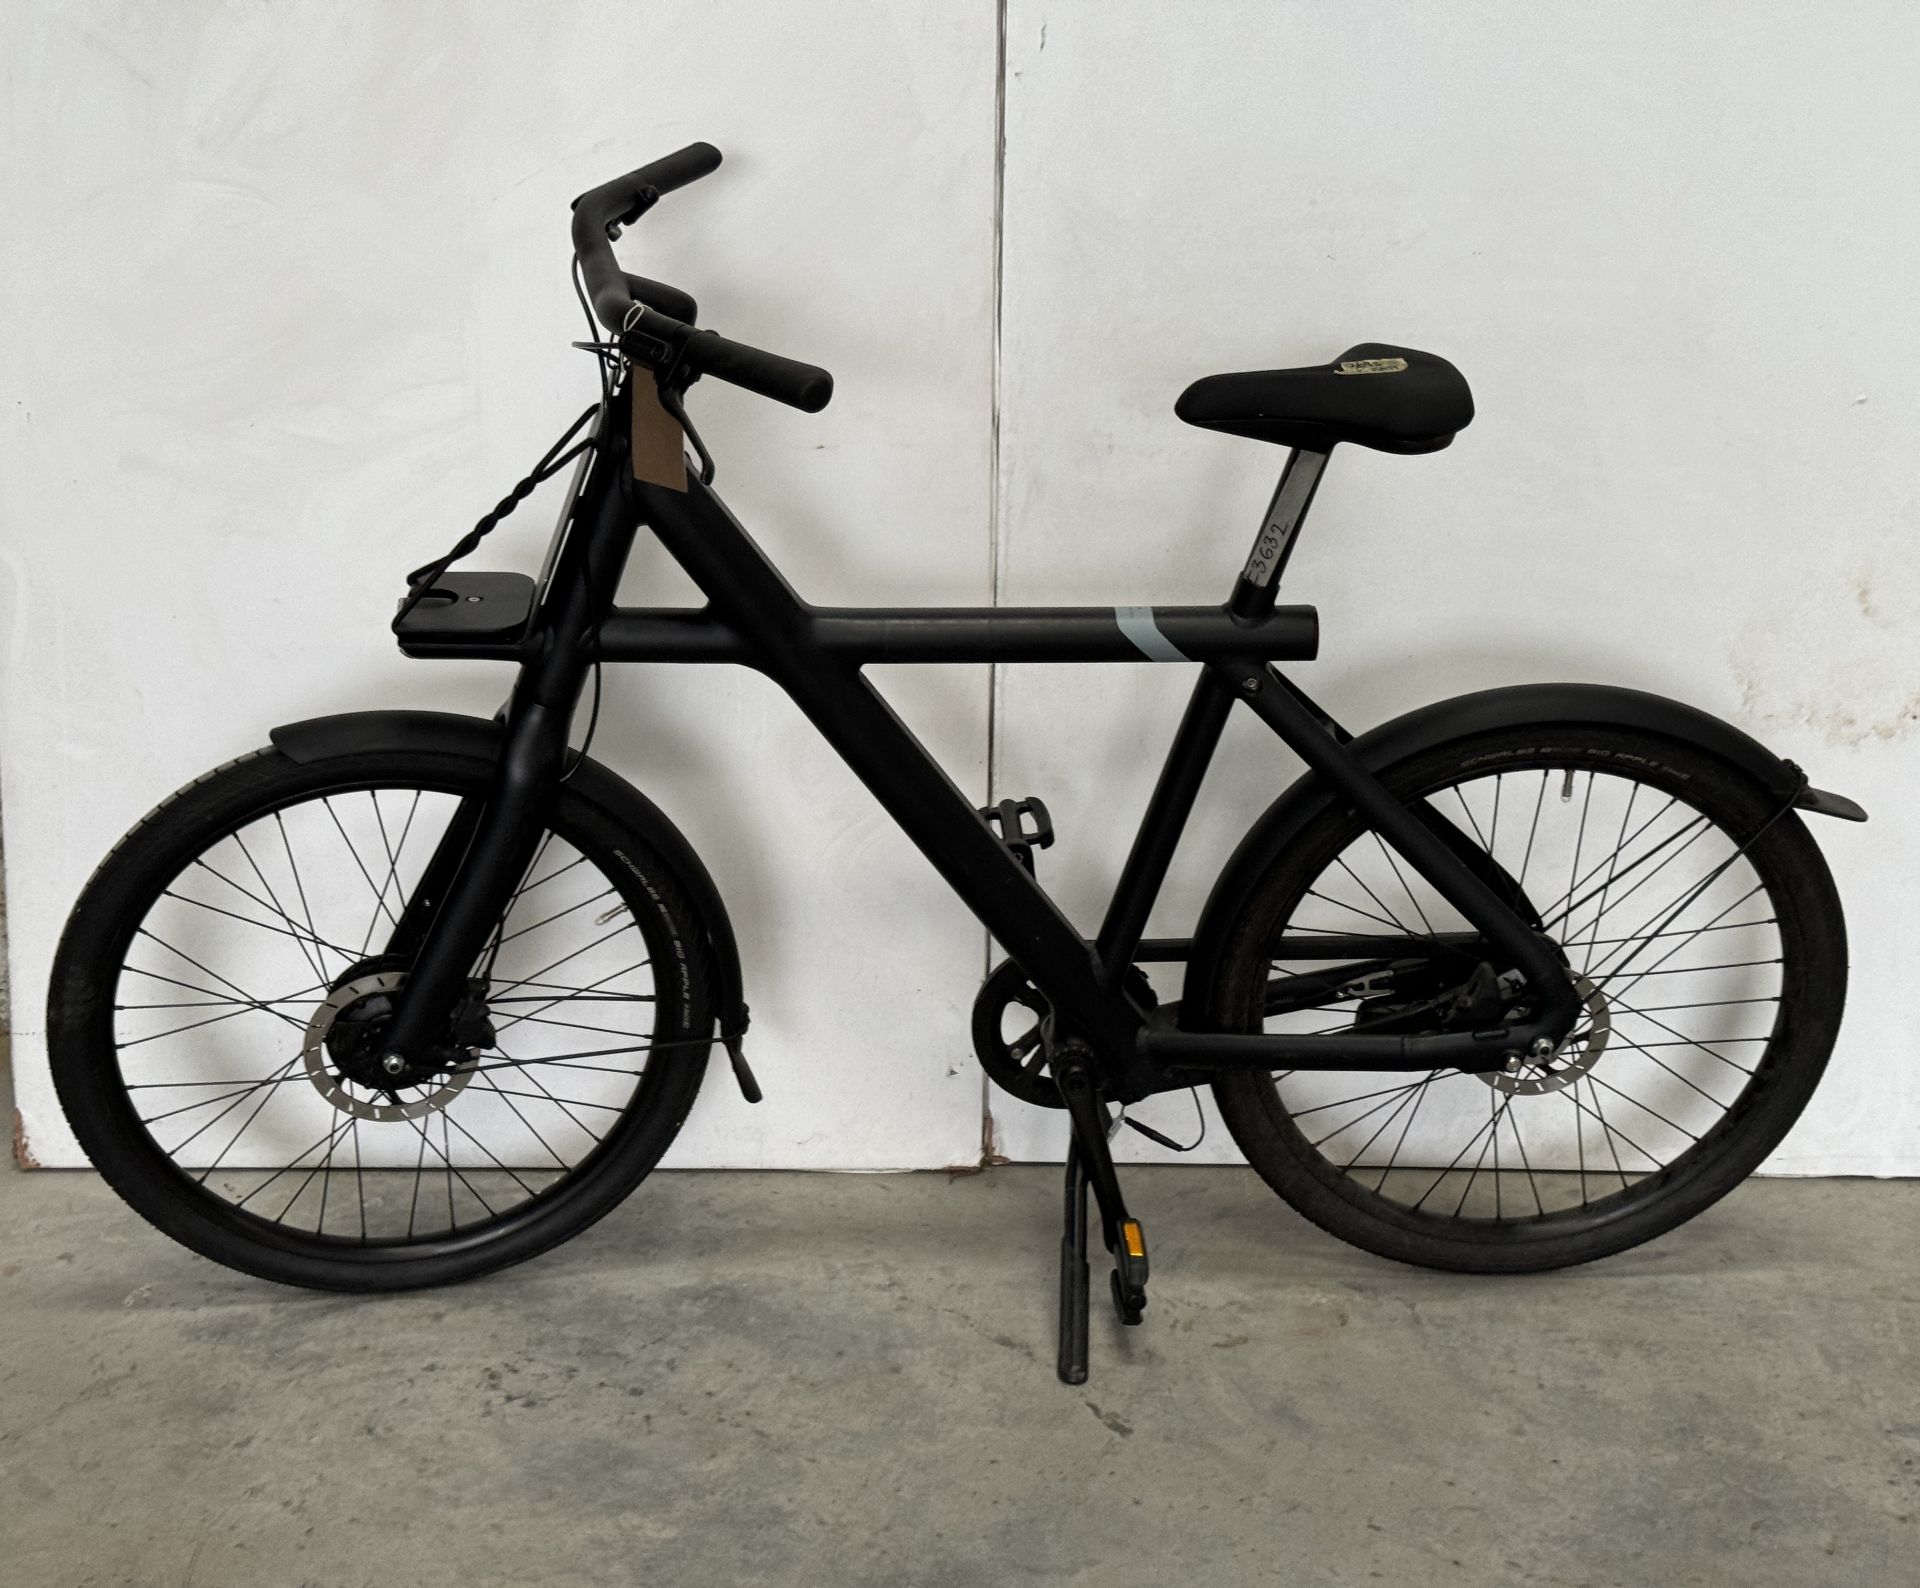 VanMoof X3 Electric Bike, Frame Number ASY4122245 (NOT ROADWORTHY - FOR SPARES ONLY) (No codes